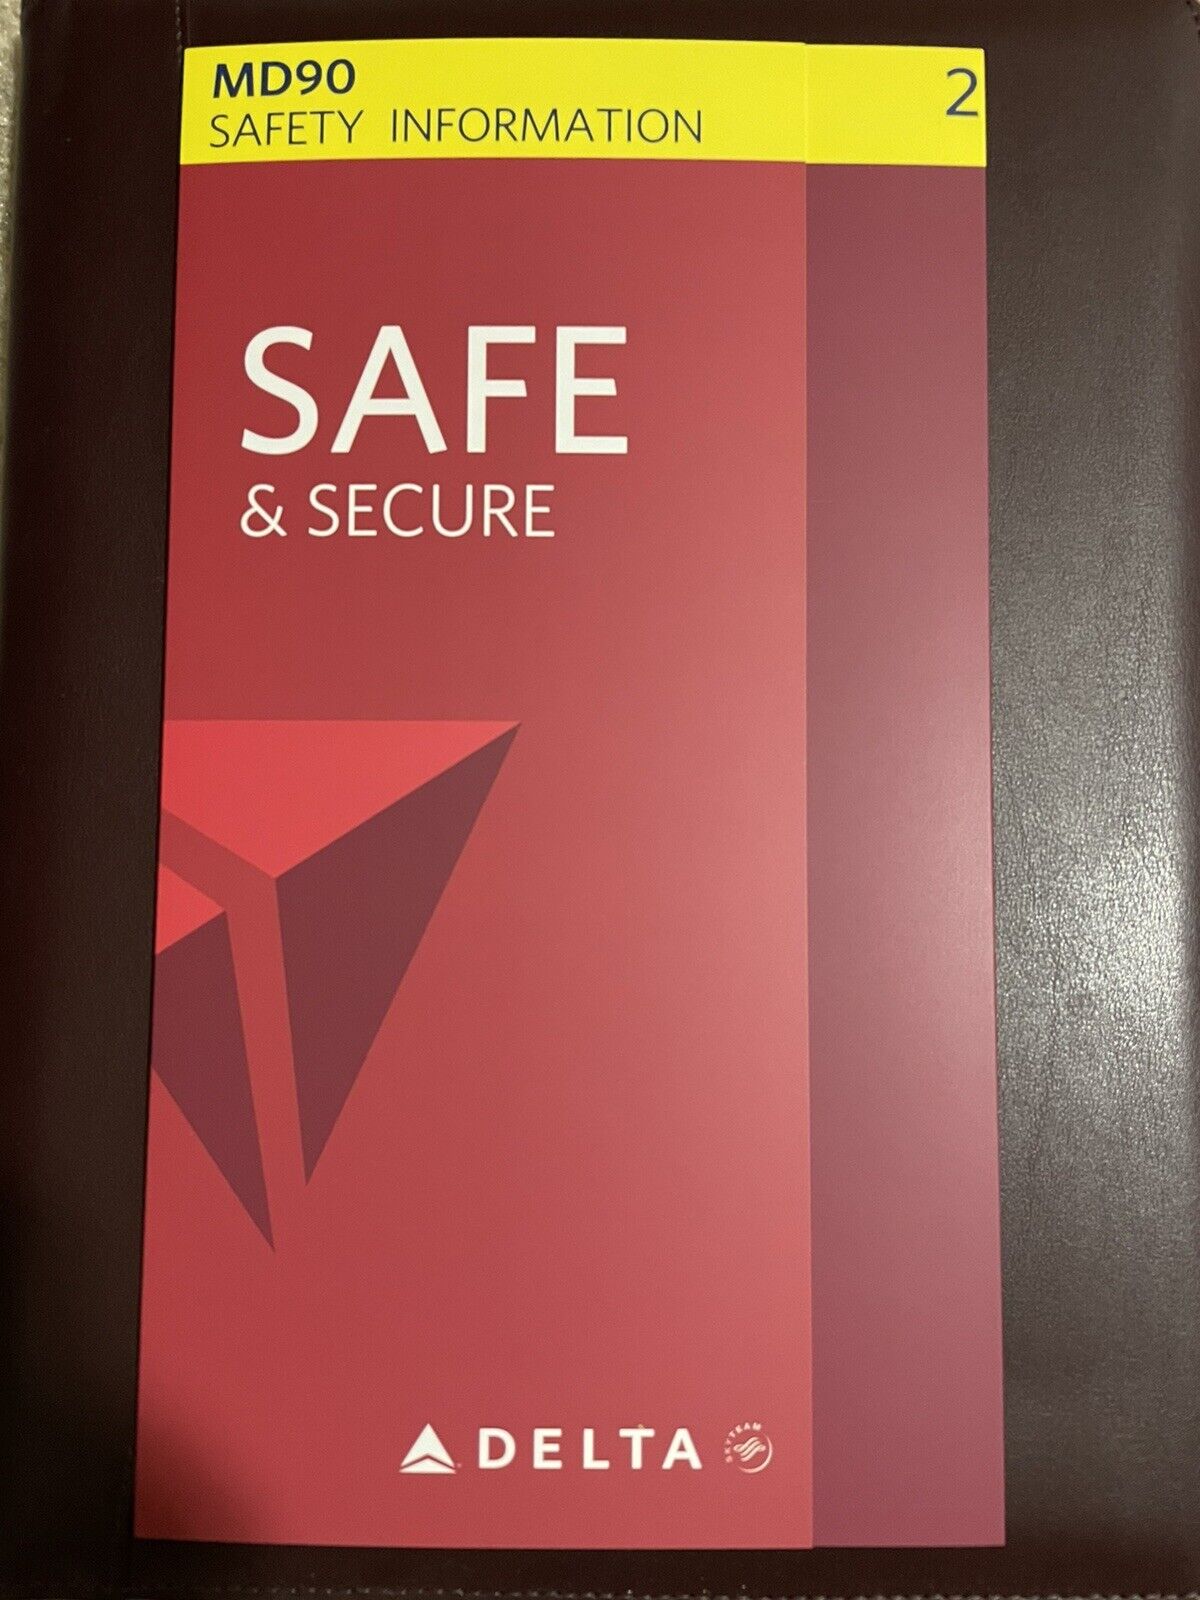 11/2015 DELTA AIRLINES SAFETY CARD MD90